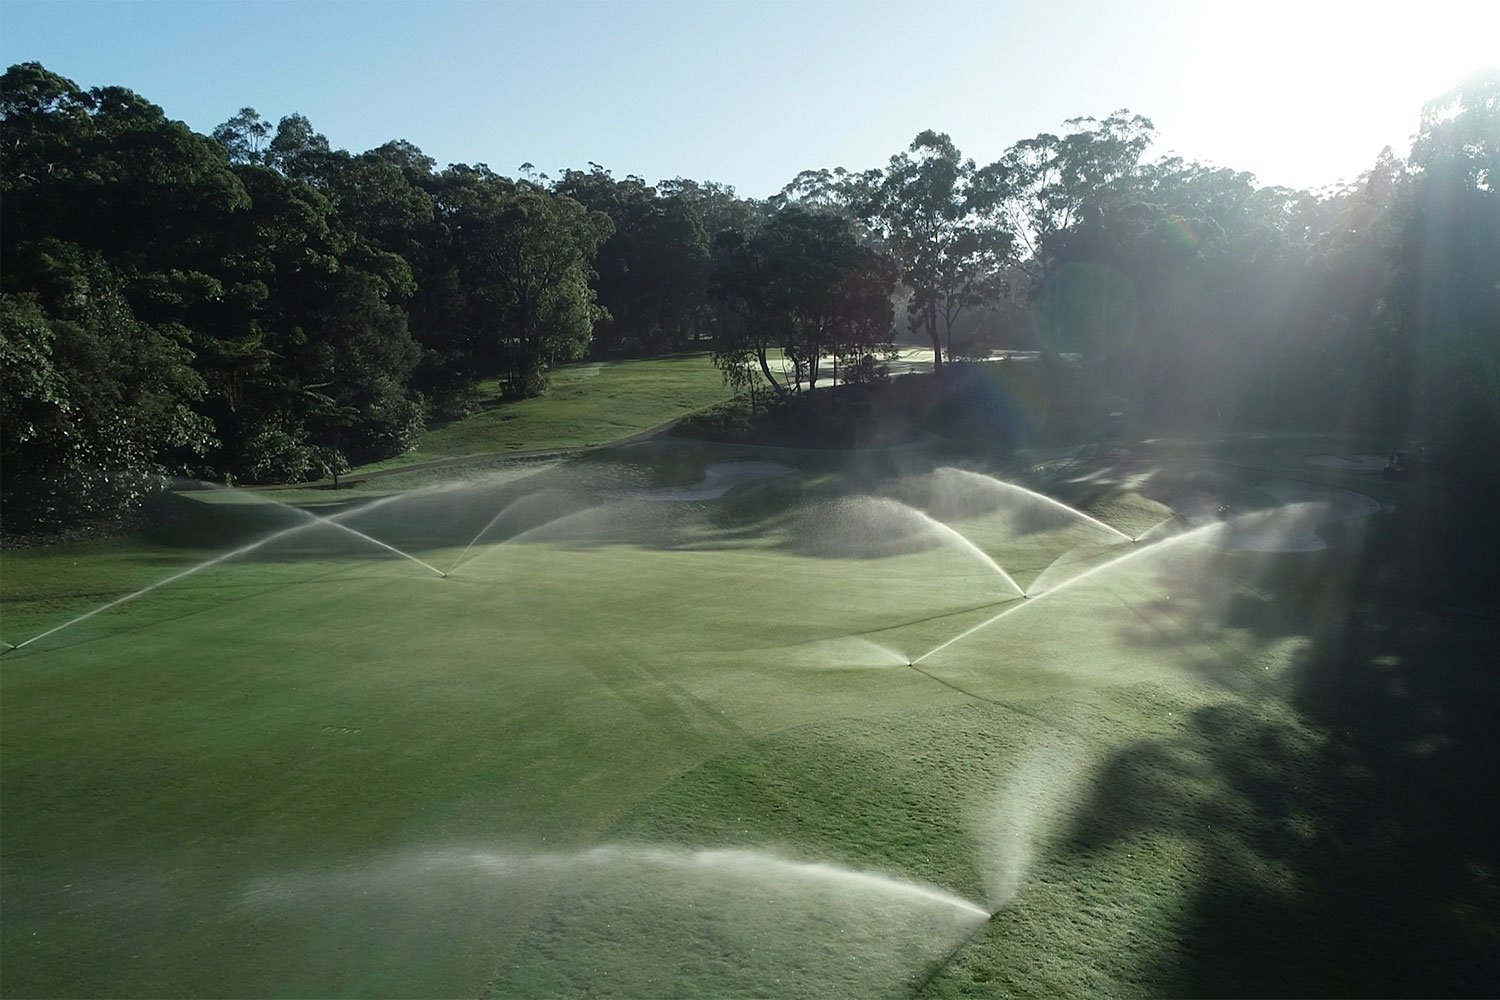 Nanobubbles allow for stable, mega-saturated levels of oxygen in course irrigation water that can be delivered right to the turf roots zone.